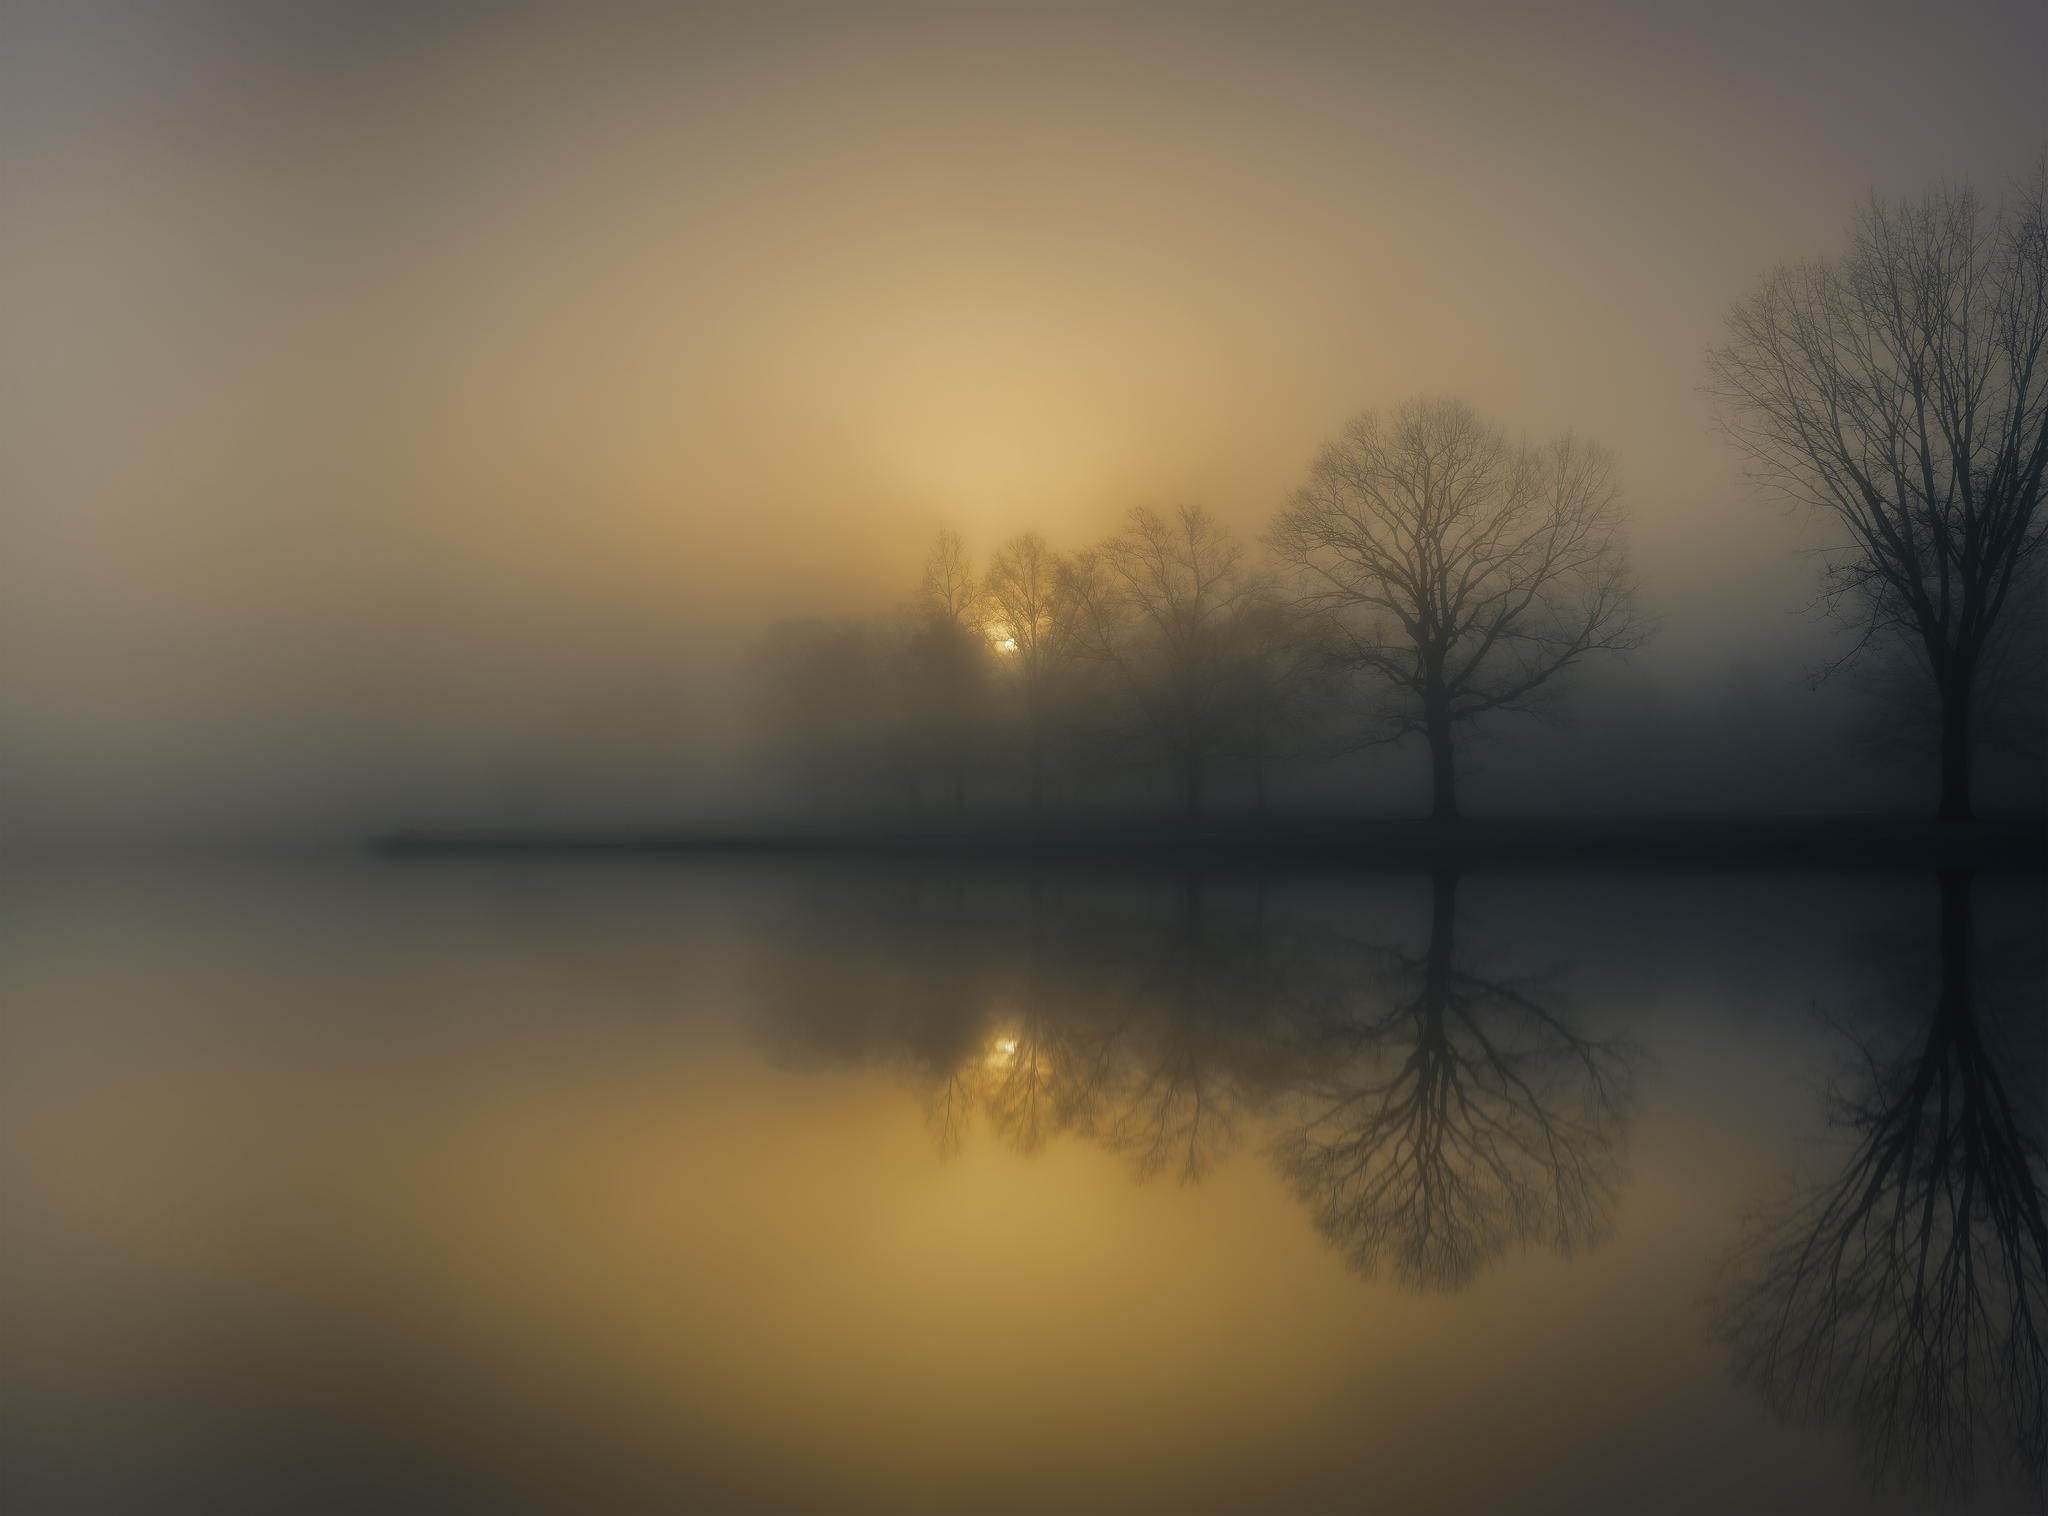 General 2048x1516 landscape nature mist reflection calm waters sunlight outdoors